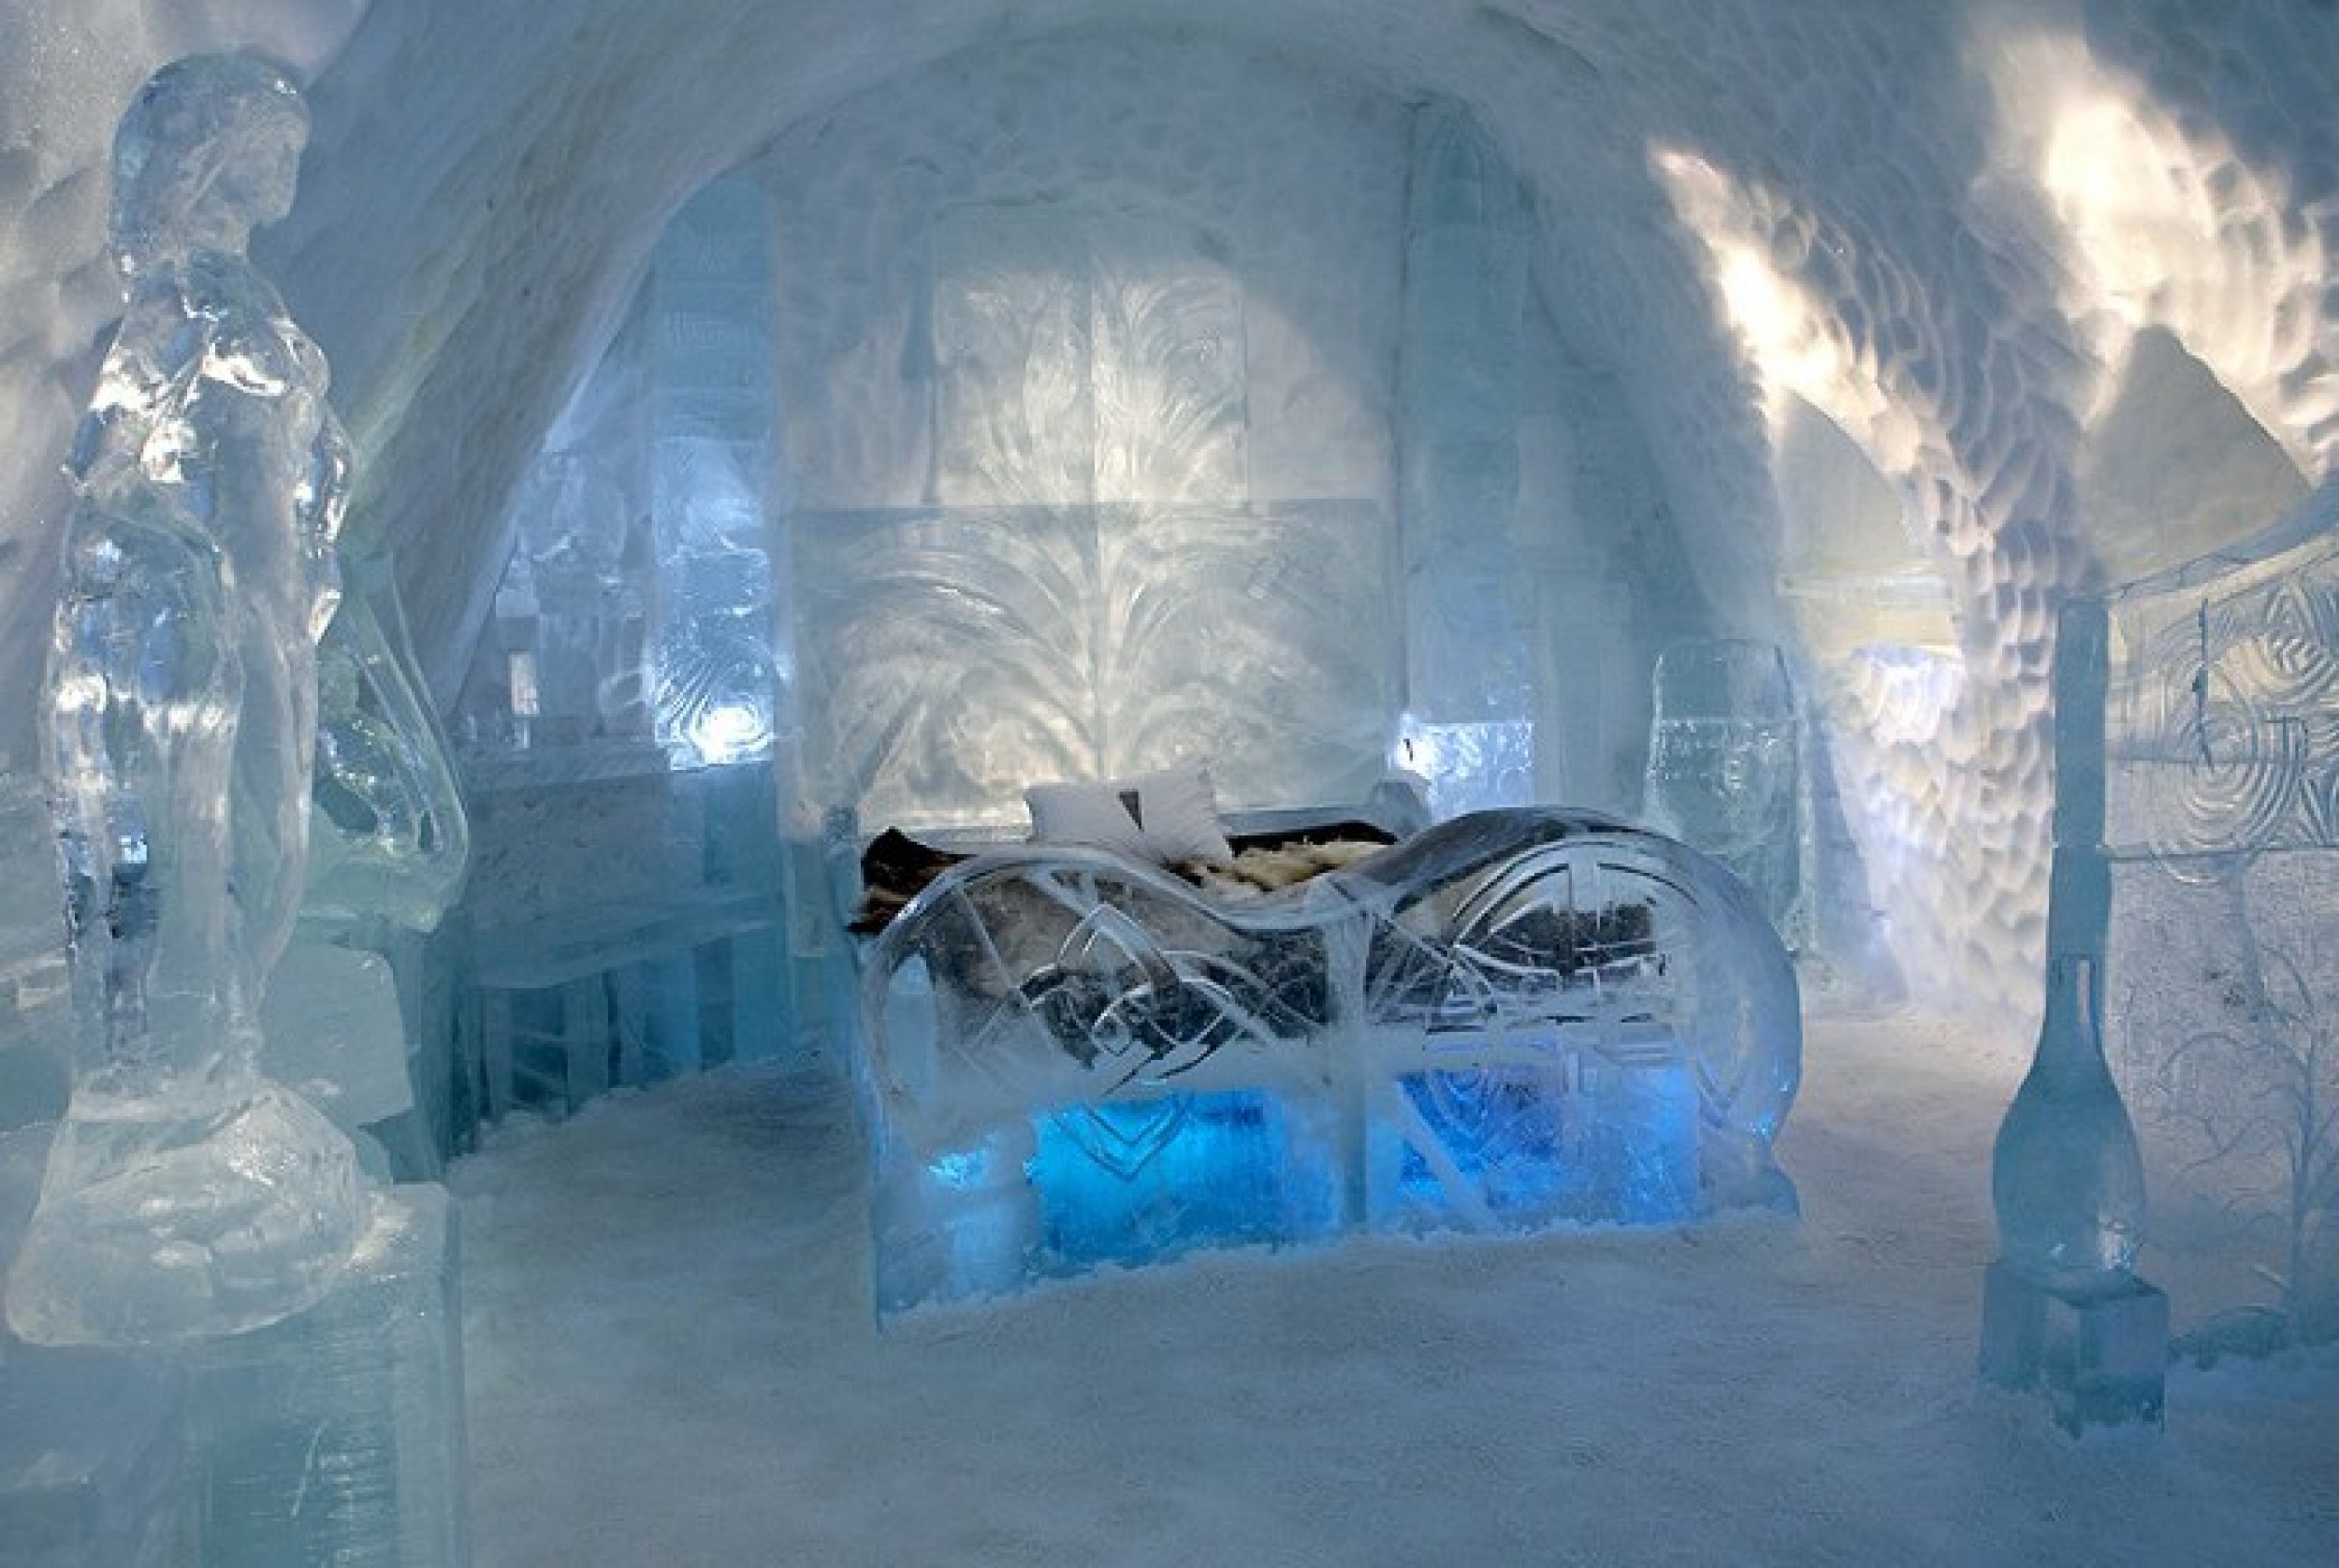 Bed of ice, Icehotel in Swedish Lapland